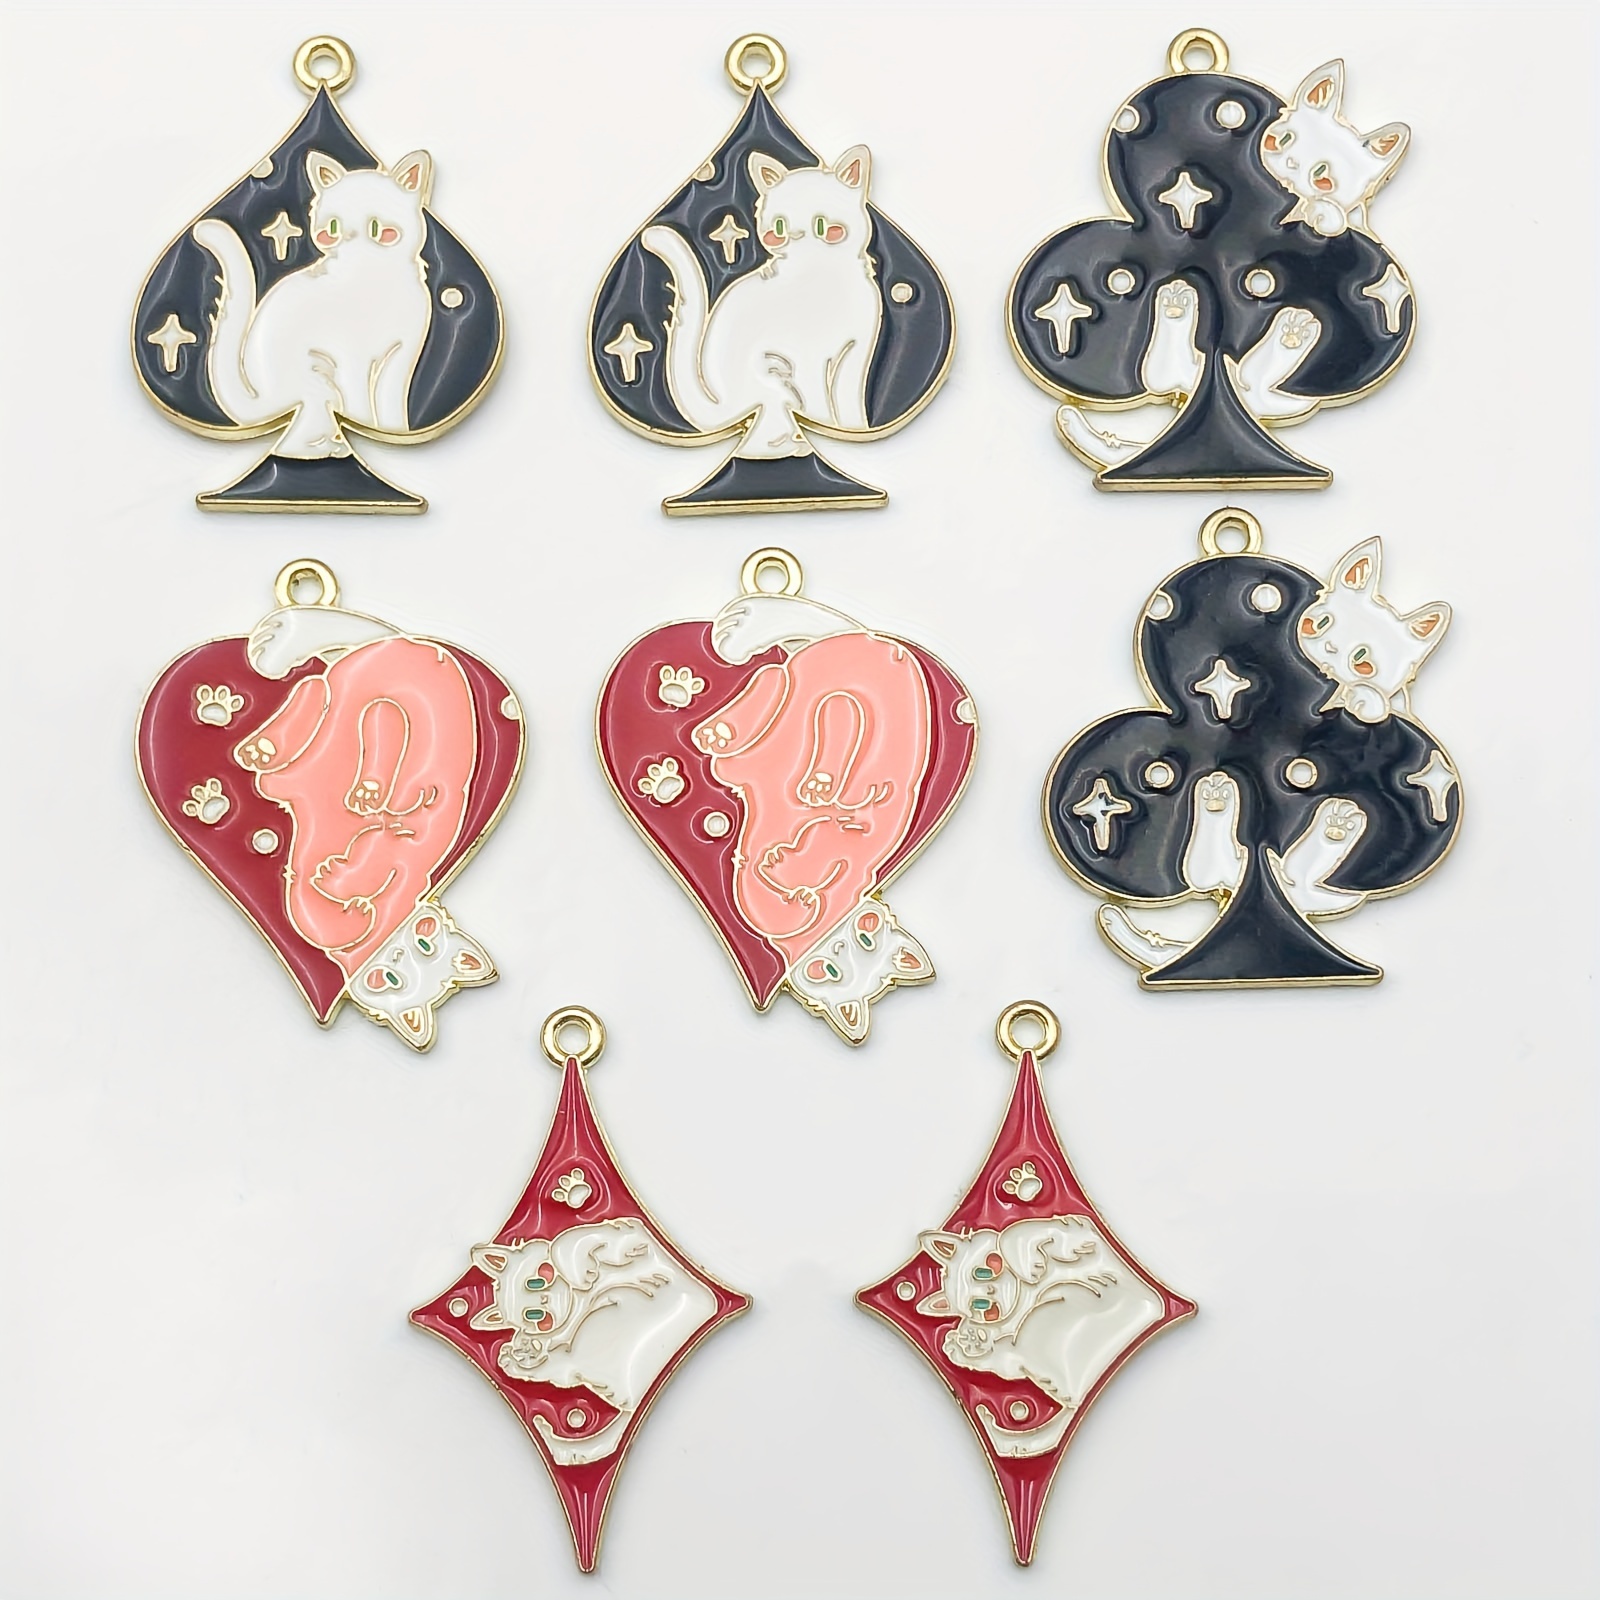 8pcs Poker Cards Charms Jack Queen King Ace Joker Acrylic Pendants for  Earring Necklace Keychain Diy Jewelry Making Accessories